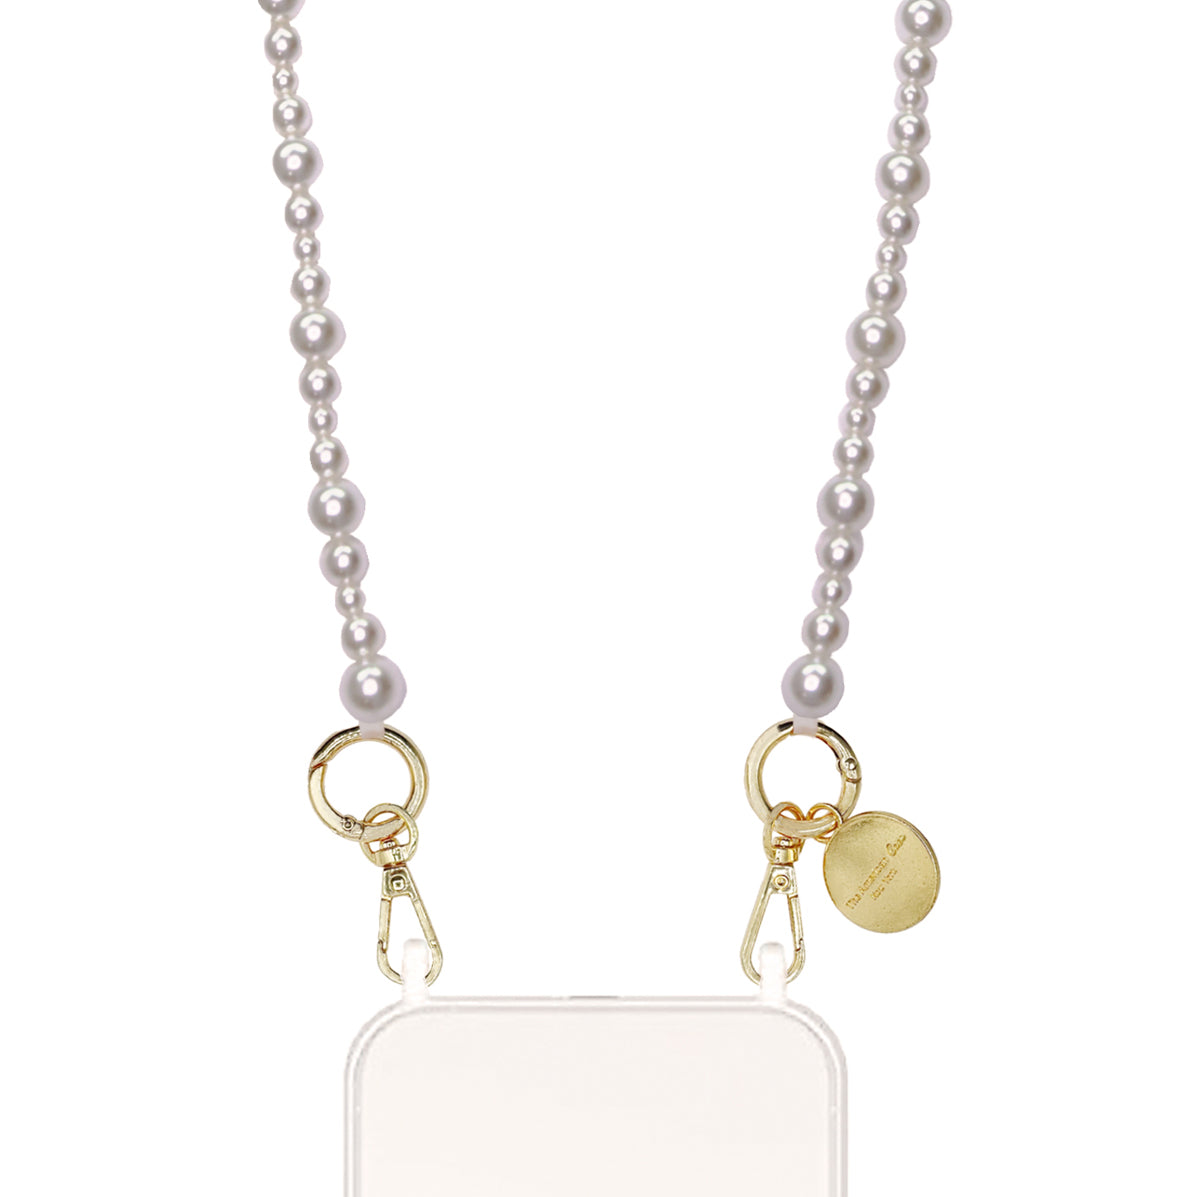 Anya- Multi-Sized White Pearl Crossbody Chain with Golden Carabiners